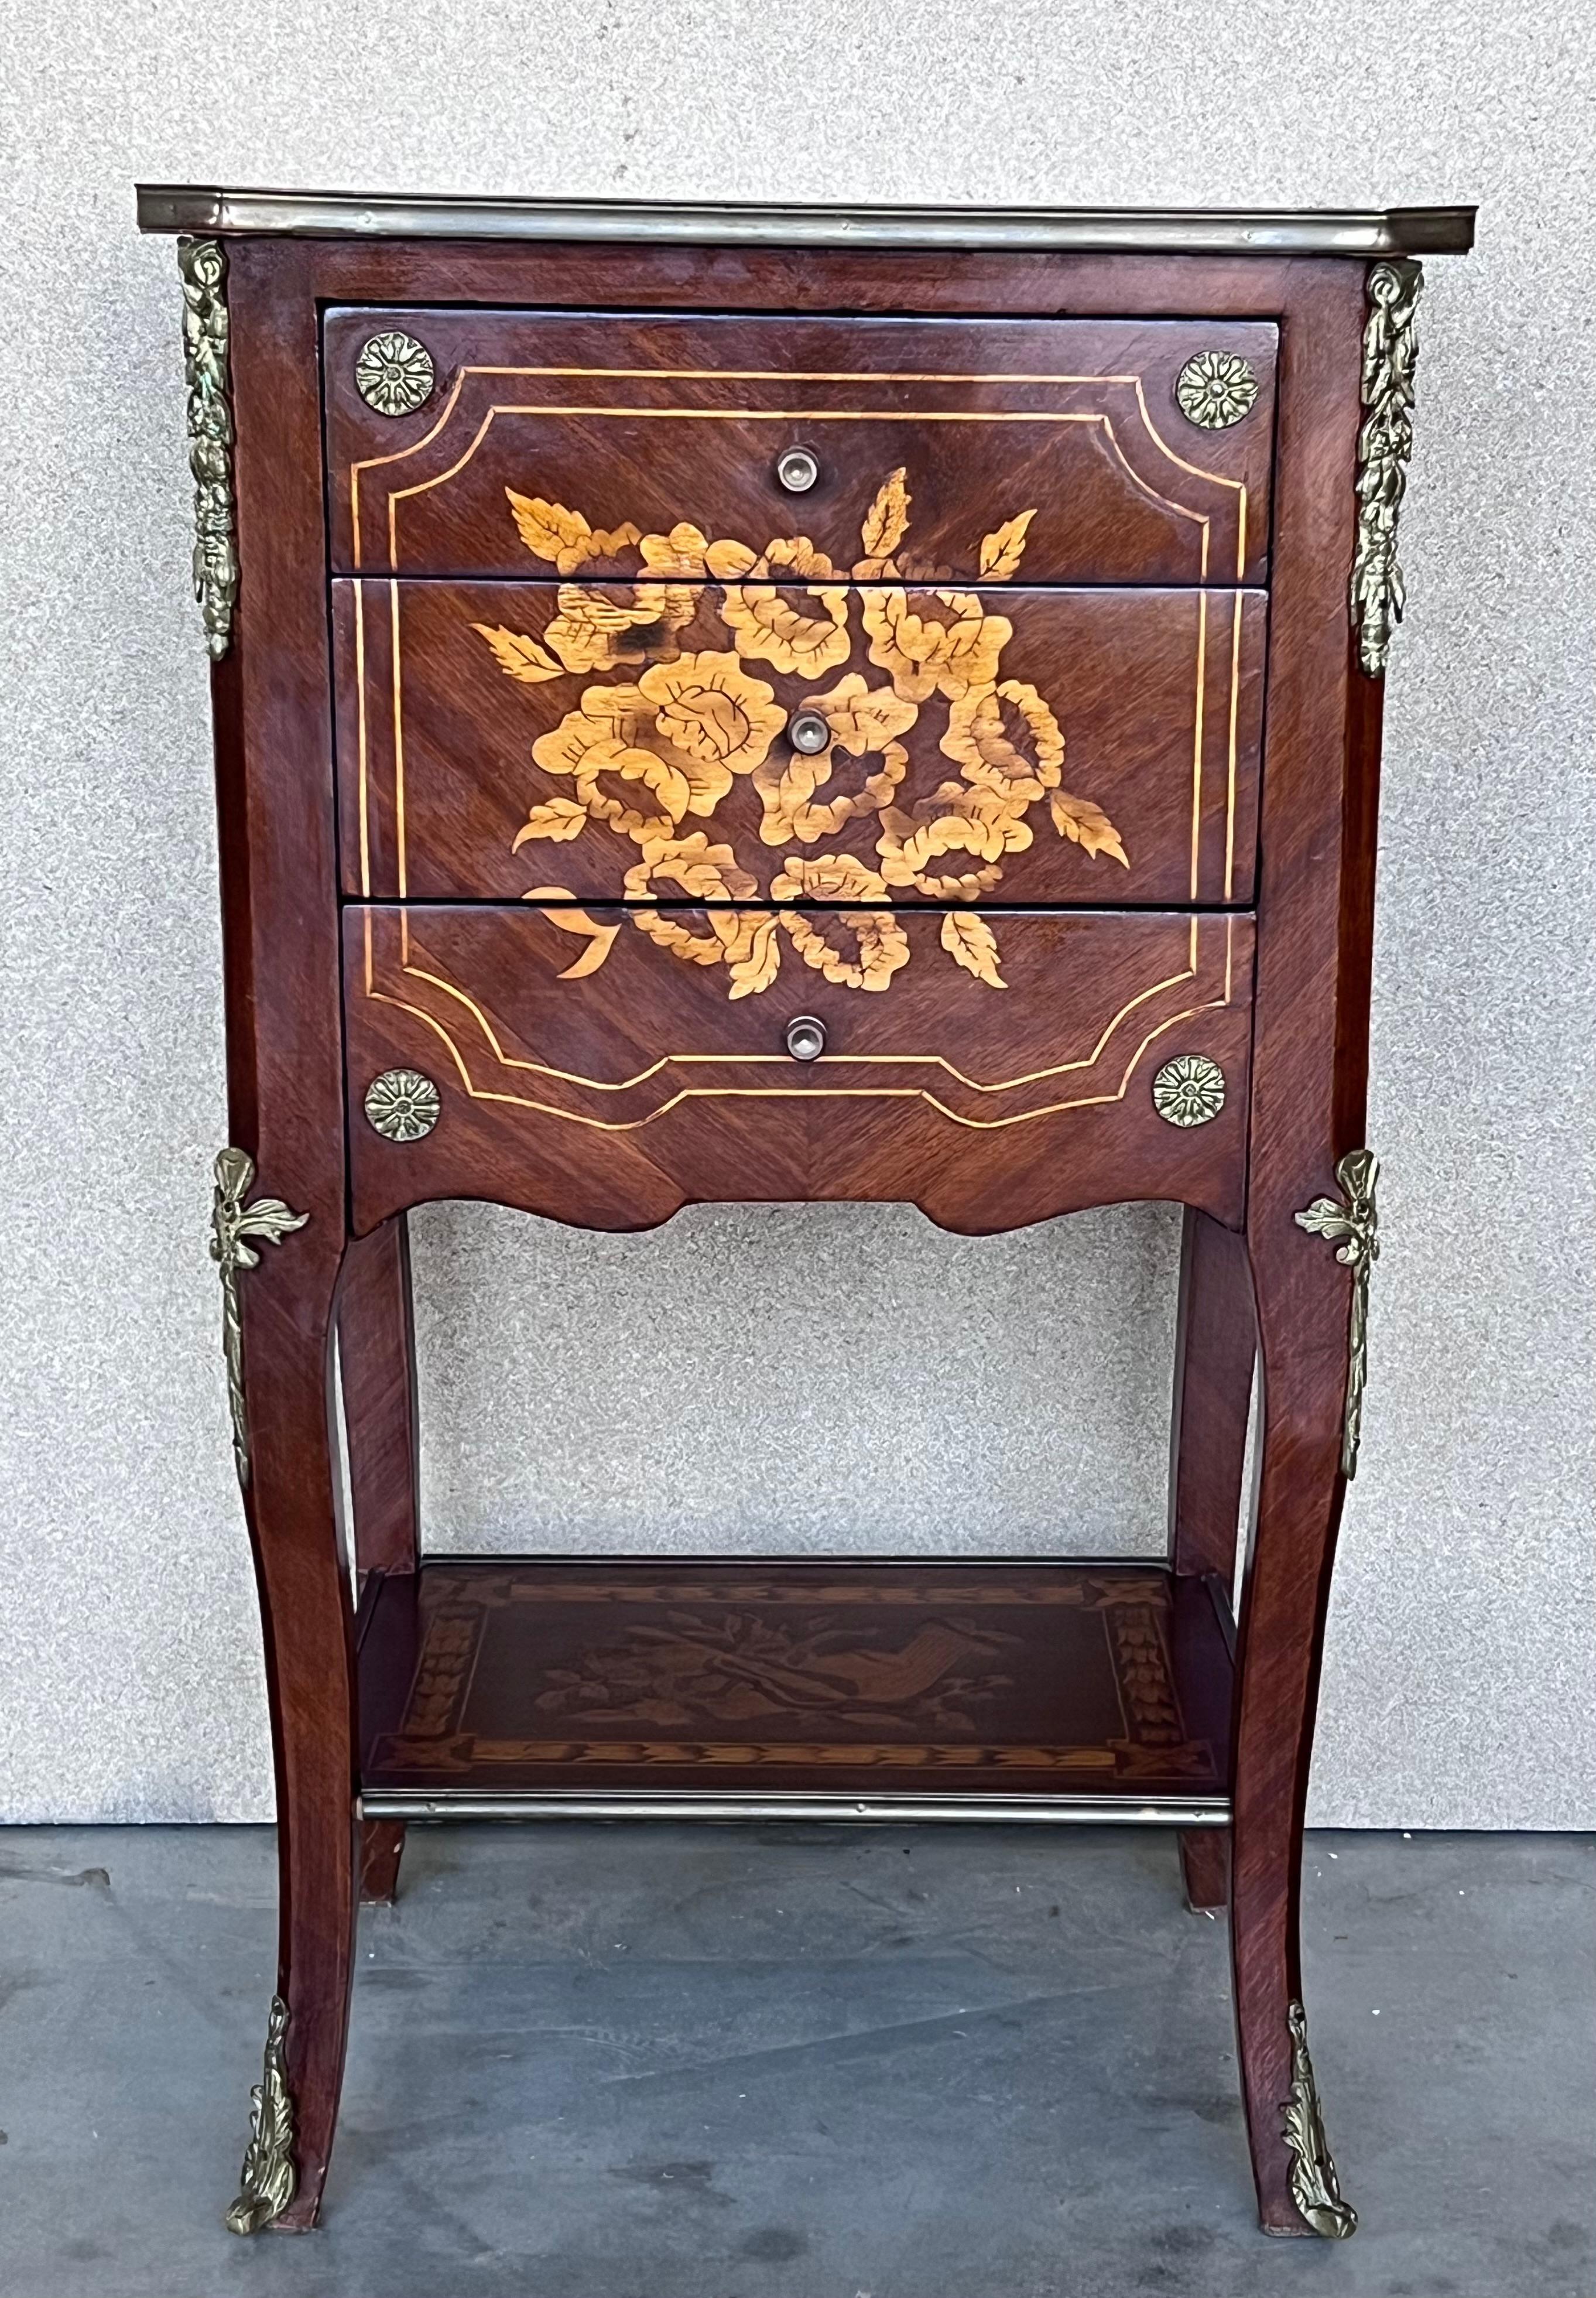 A very fine Louis XV Italian side tables or nightstands with elegant marquetry work, all original unrestored. This sumptuous side tables have a distinctively shaped rectangular marquetry top with an attractive bronze mounted border. The body is